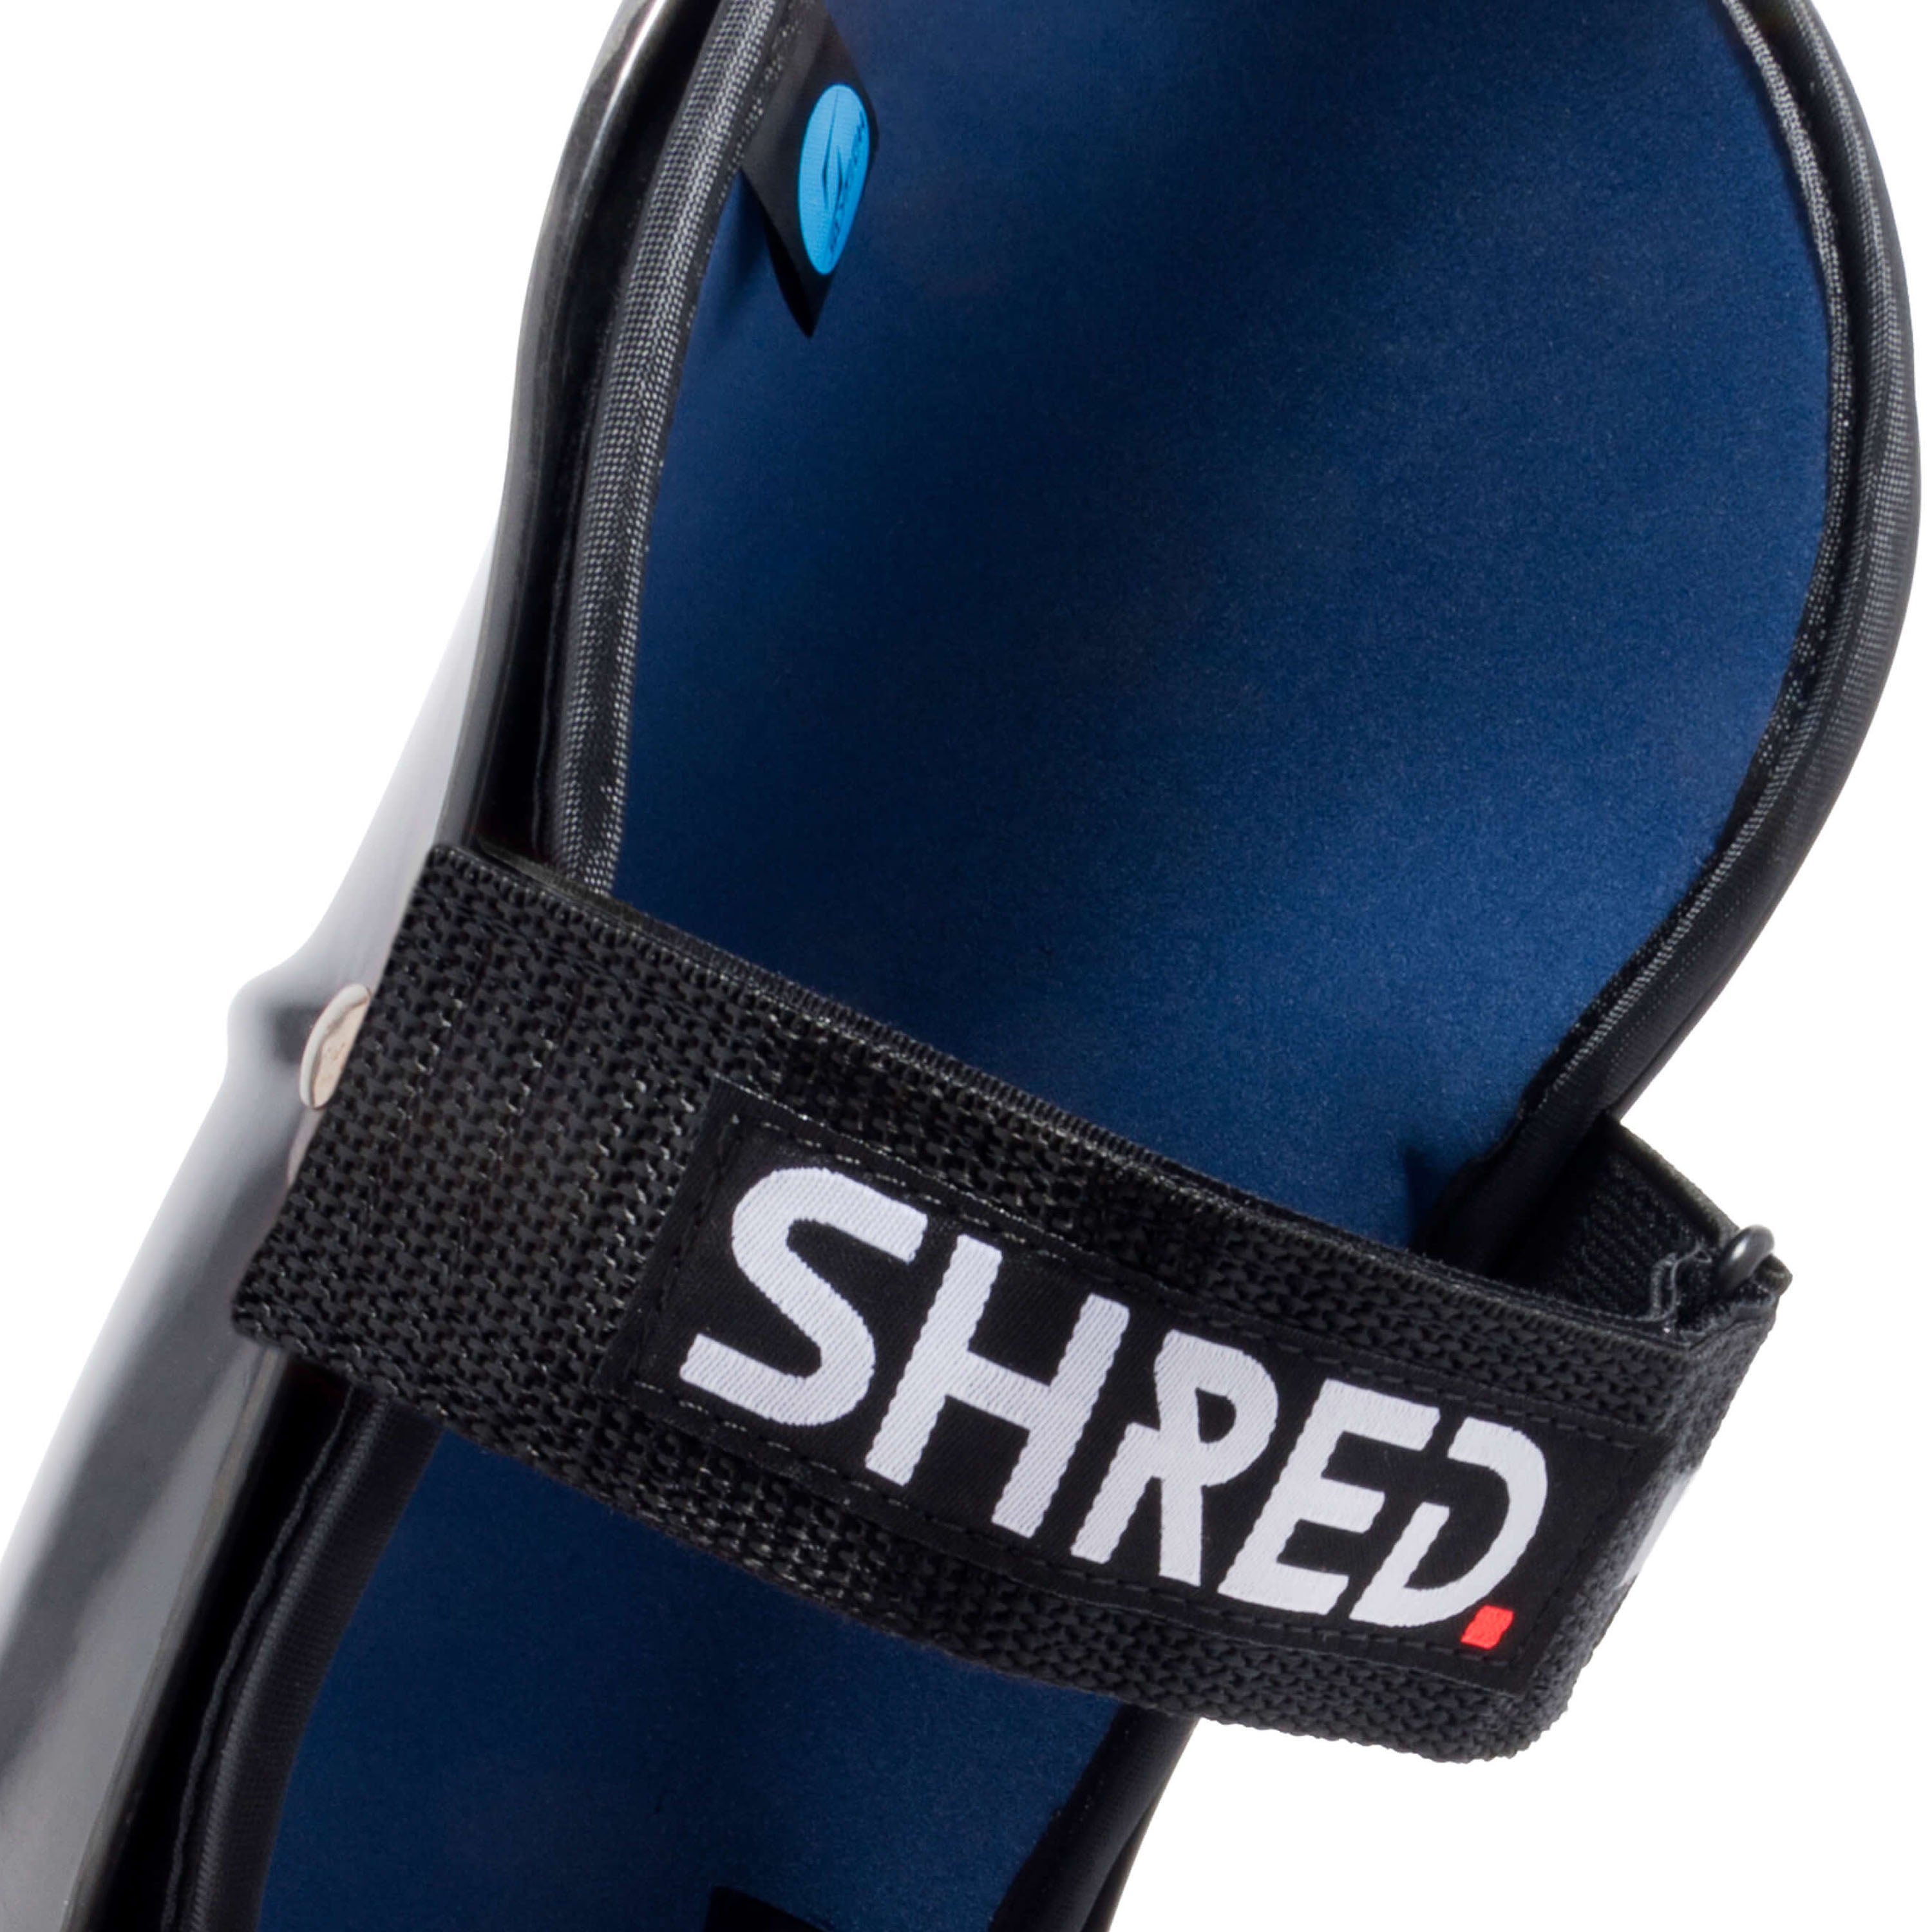 Carbon Shin Guards - Race Protective Gear - SHRED.